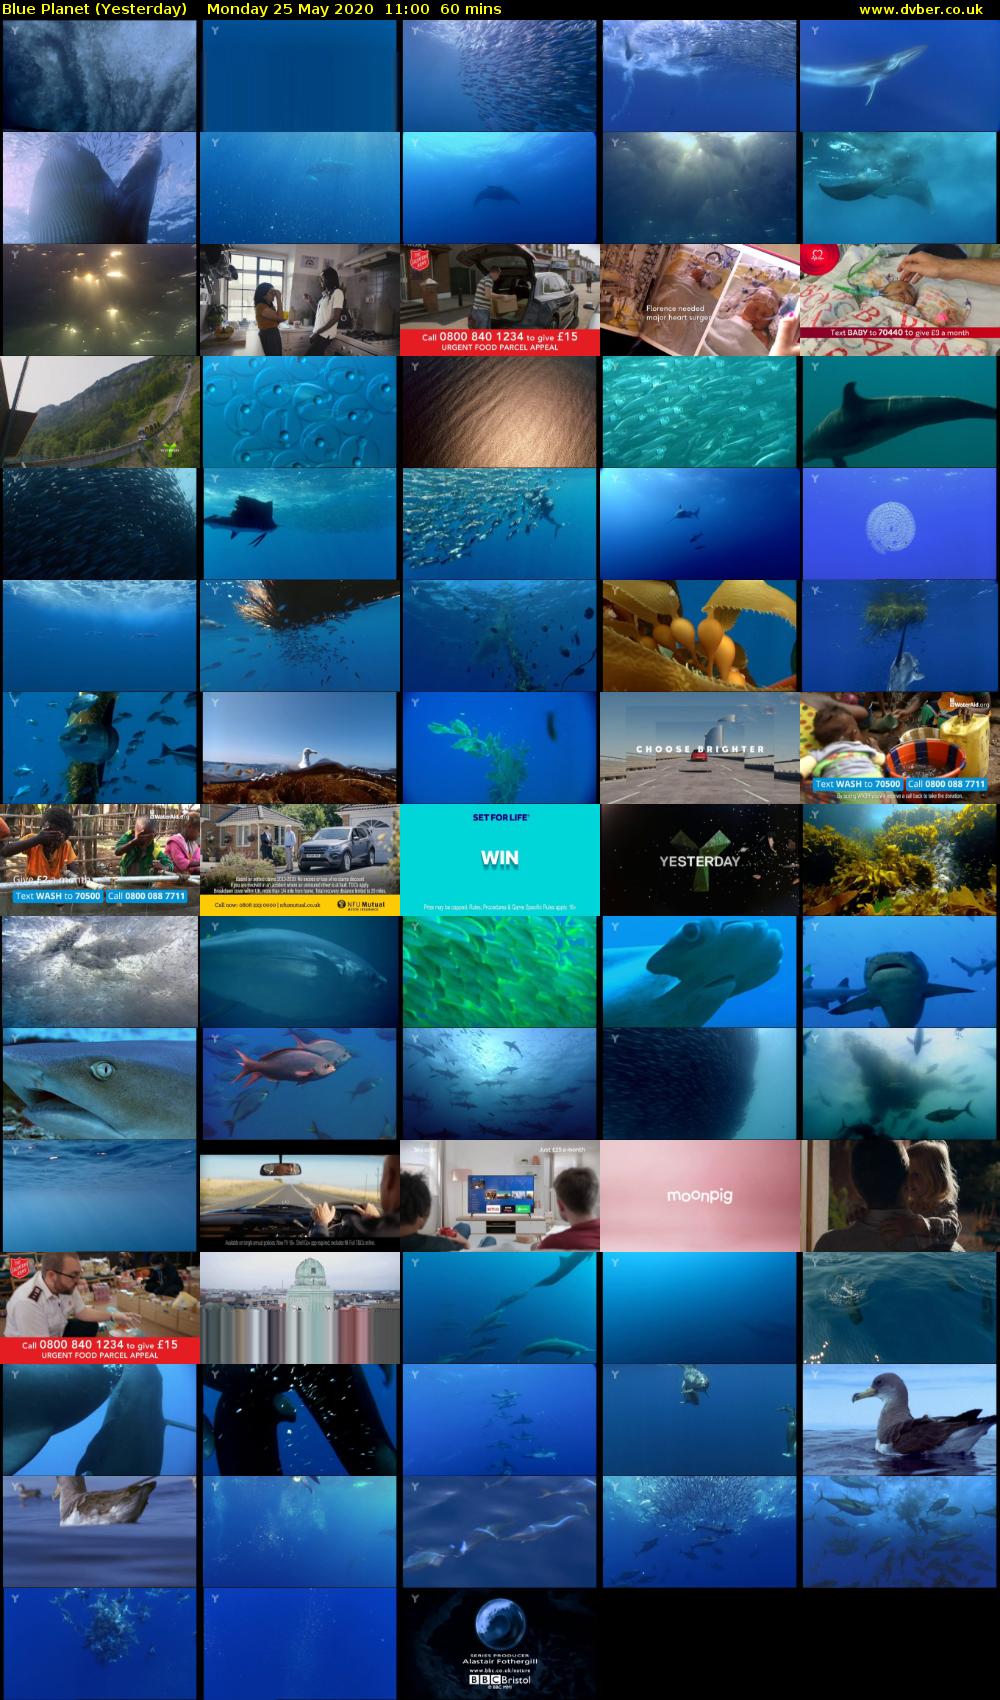 Blue Planet (Yesterday) Monday 25 May 2020 11:00 - 12:00